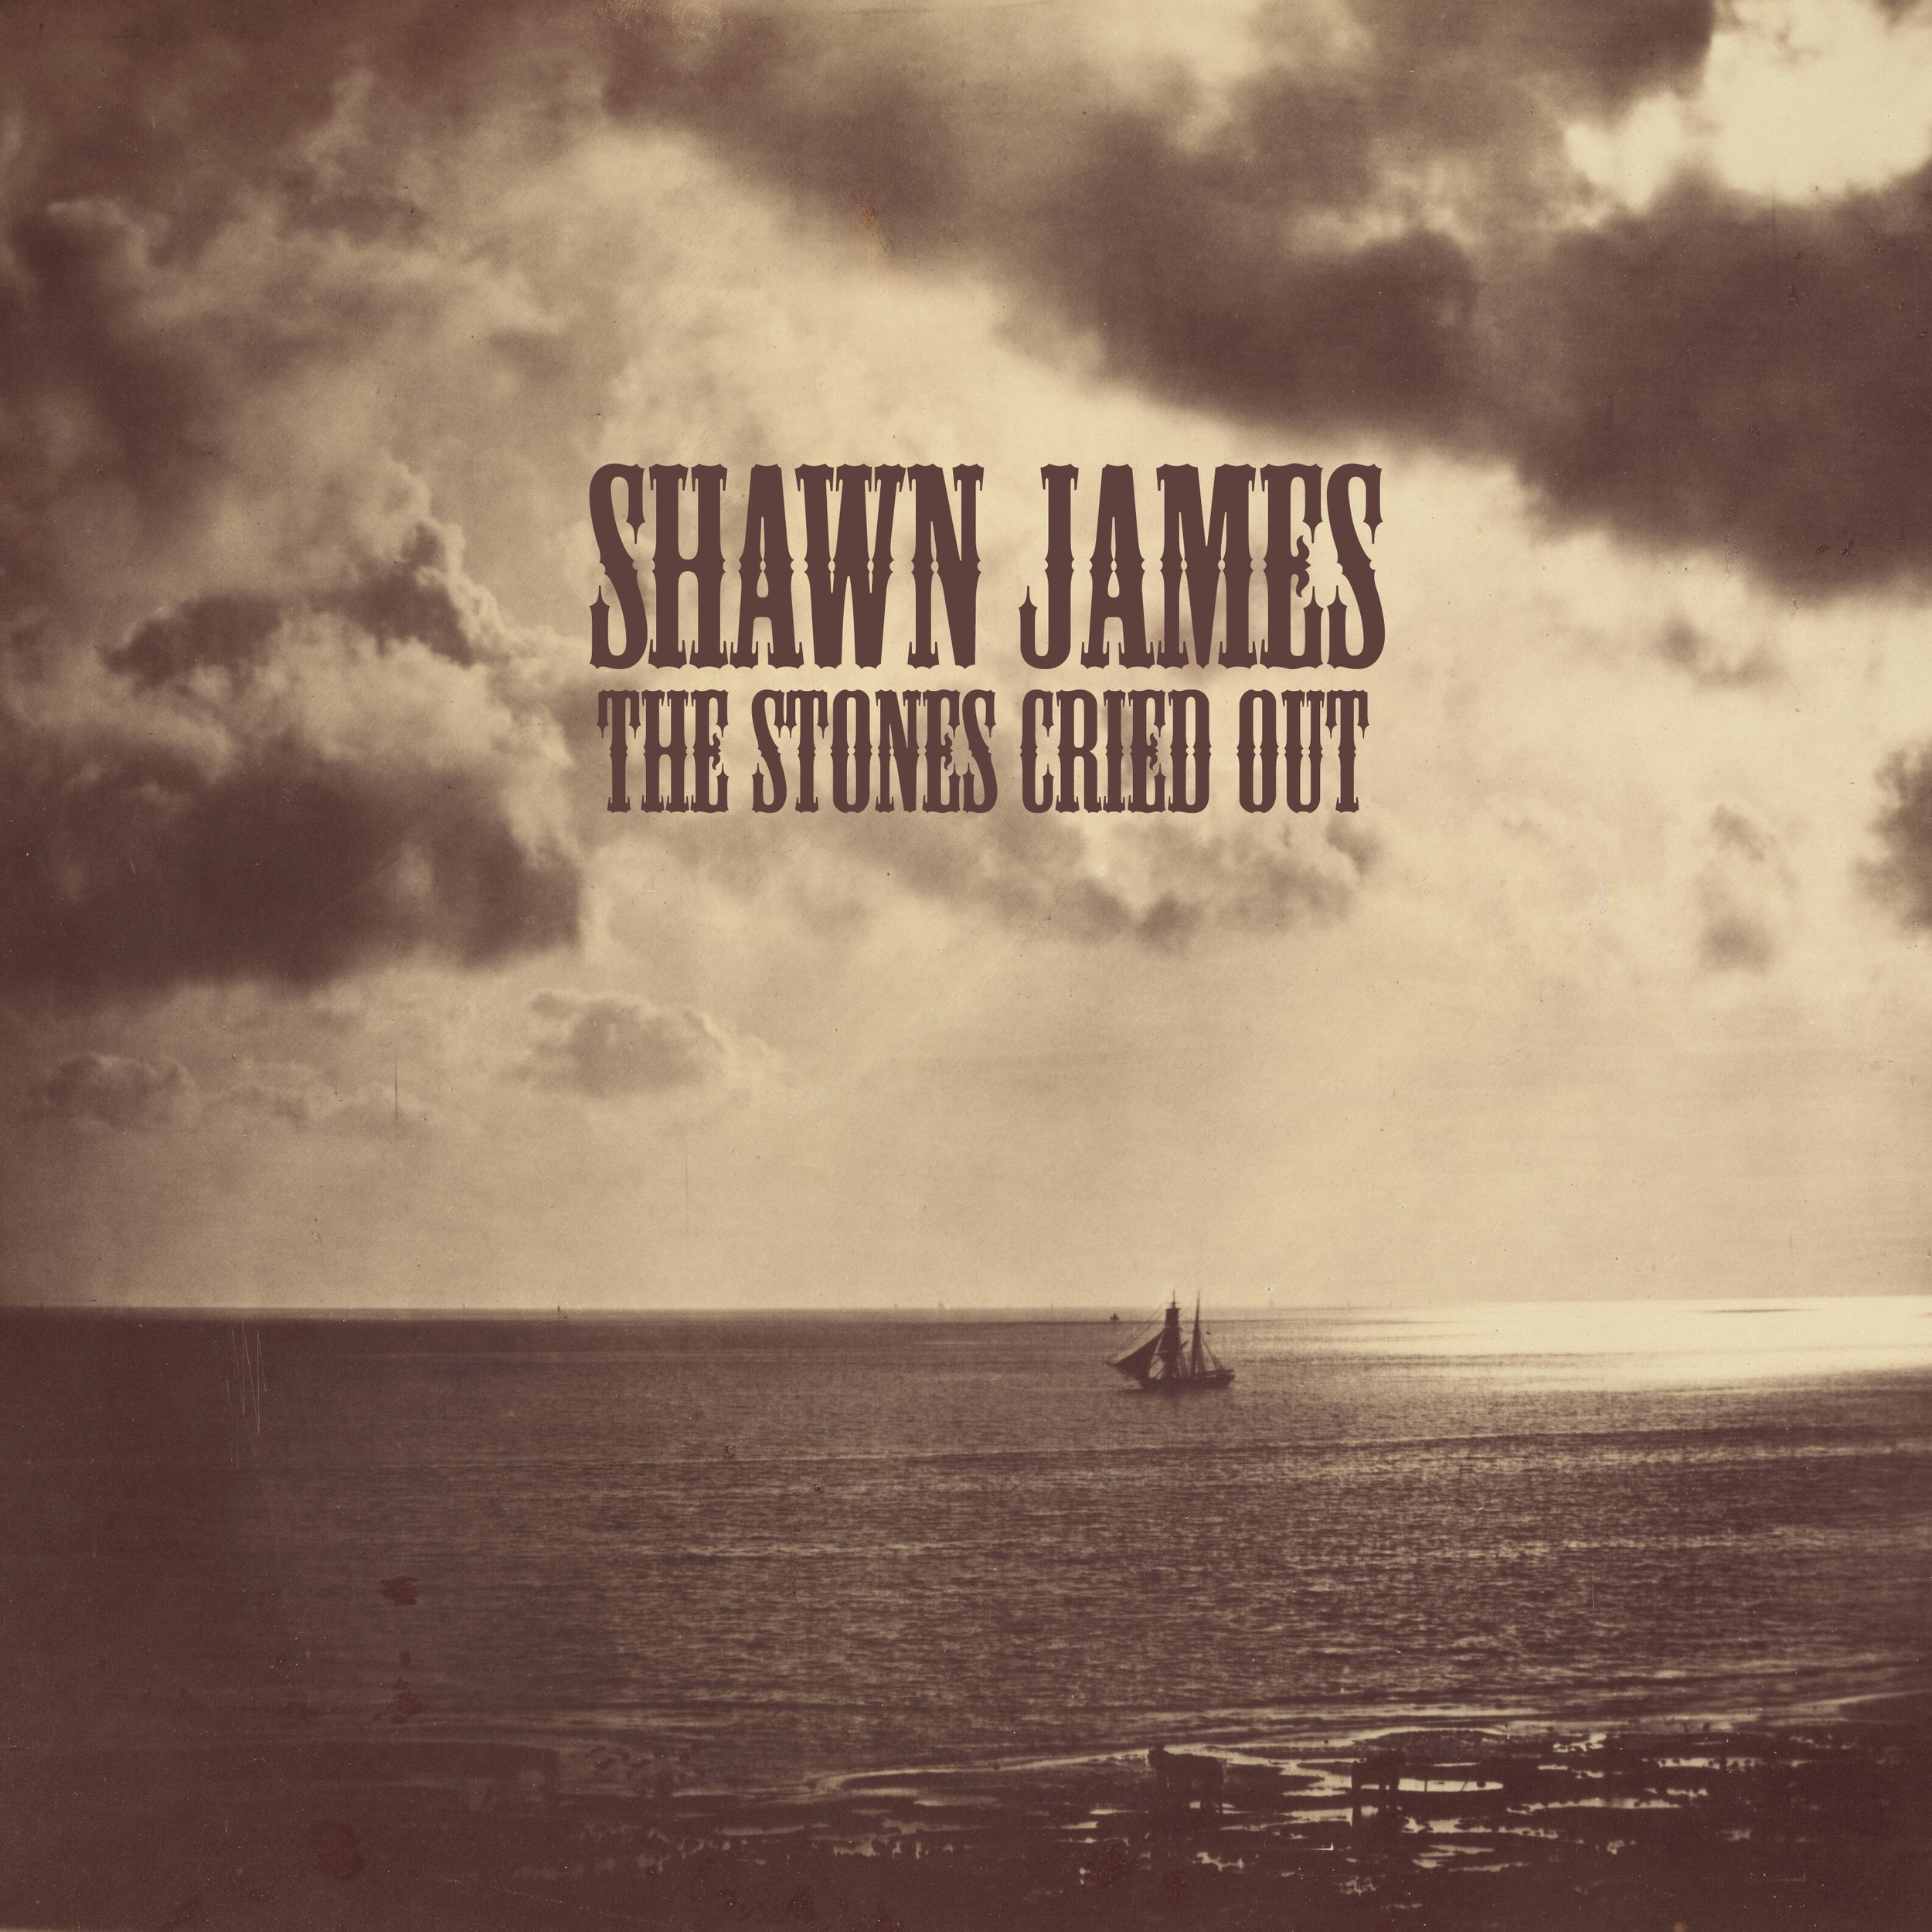 New Music from Shawn James